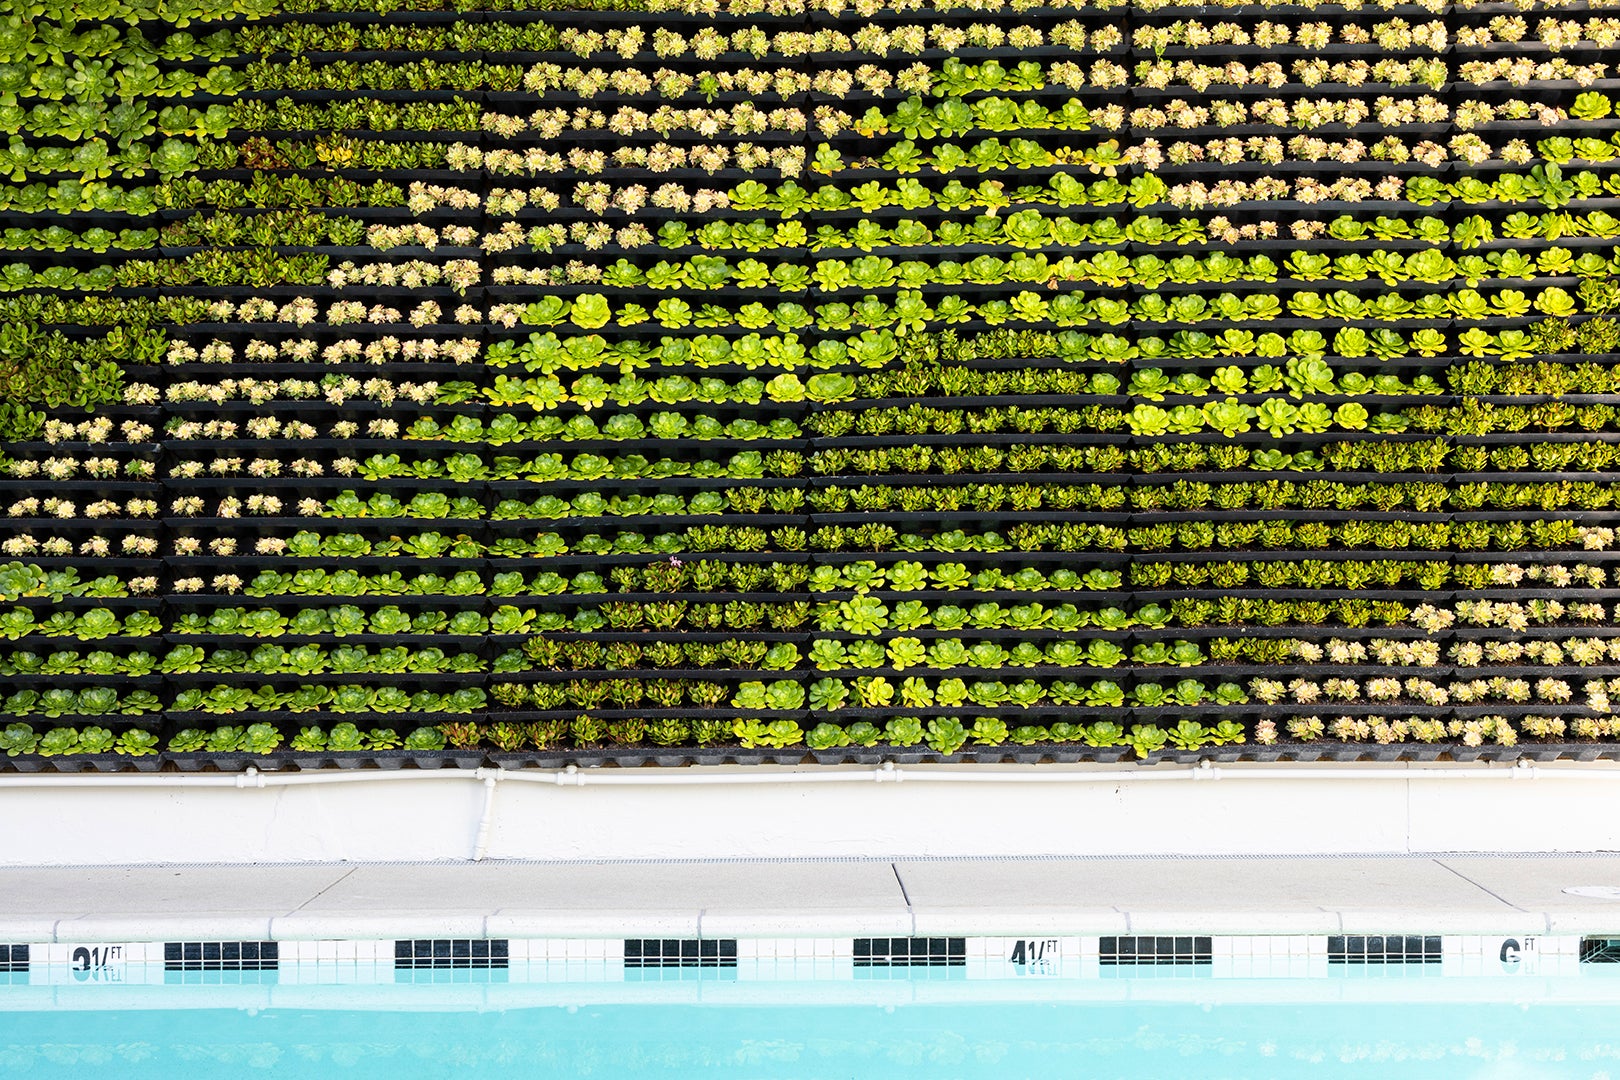 Wall of succulents next to outdoor pool